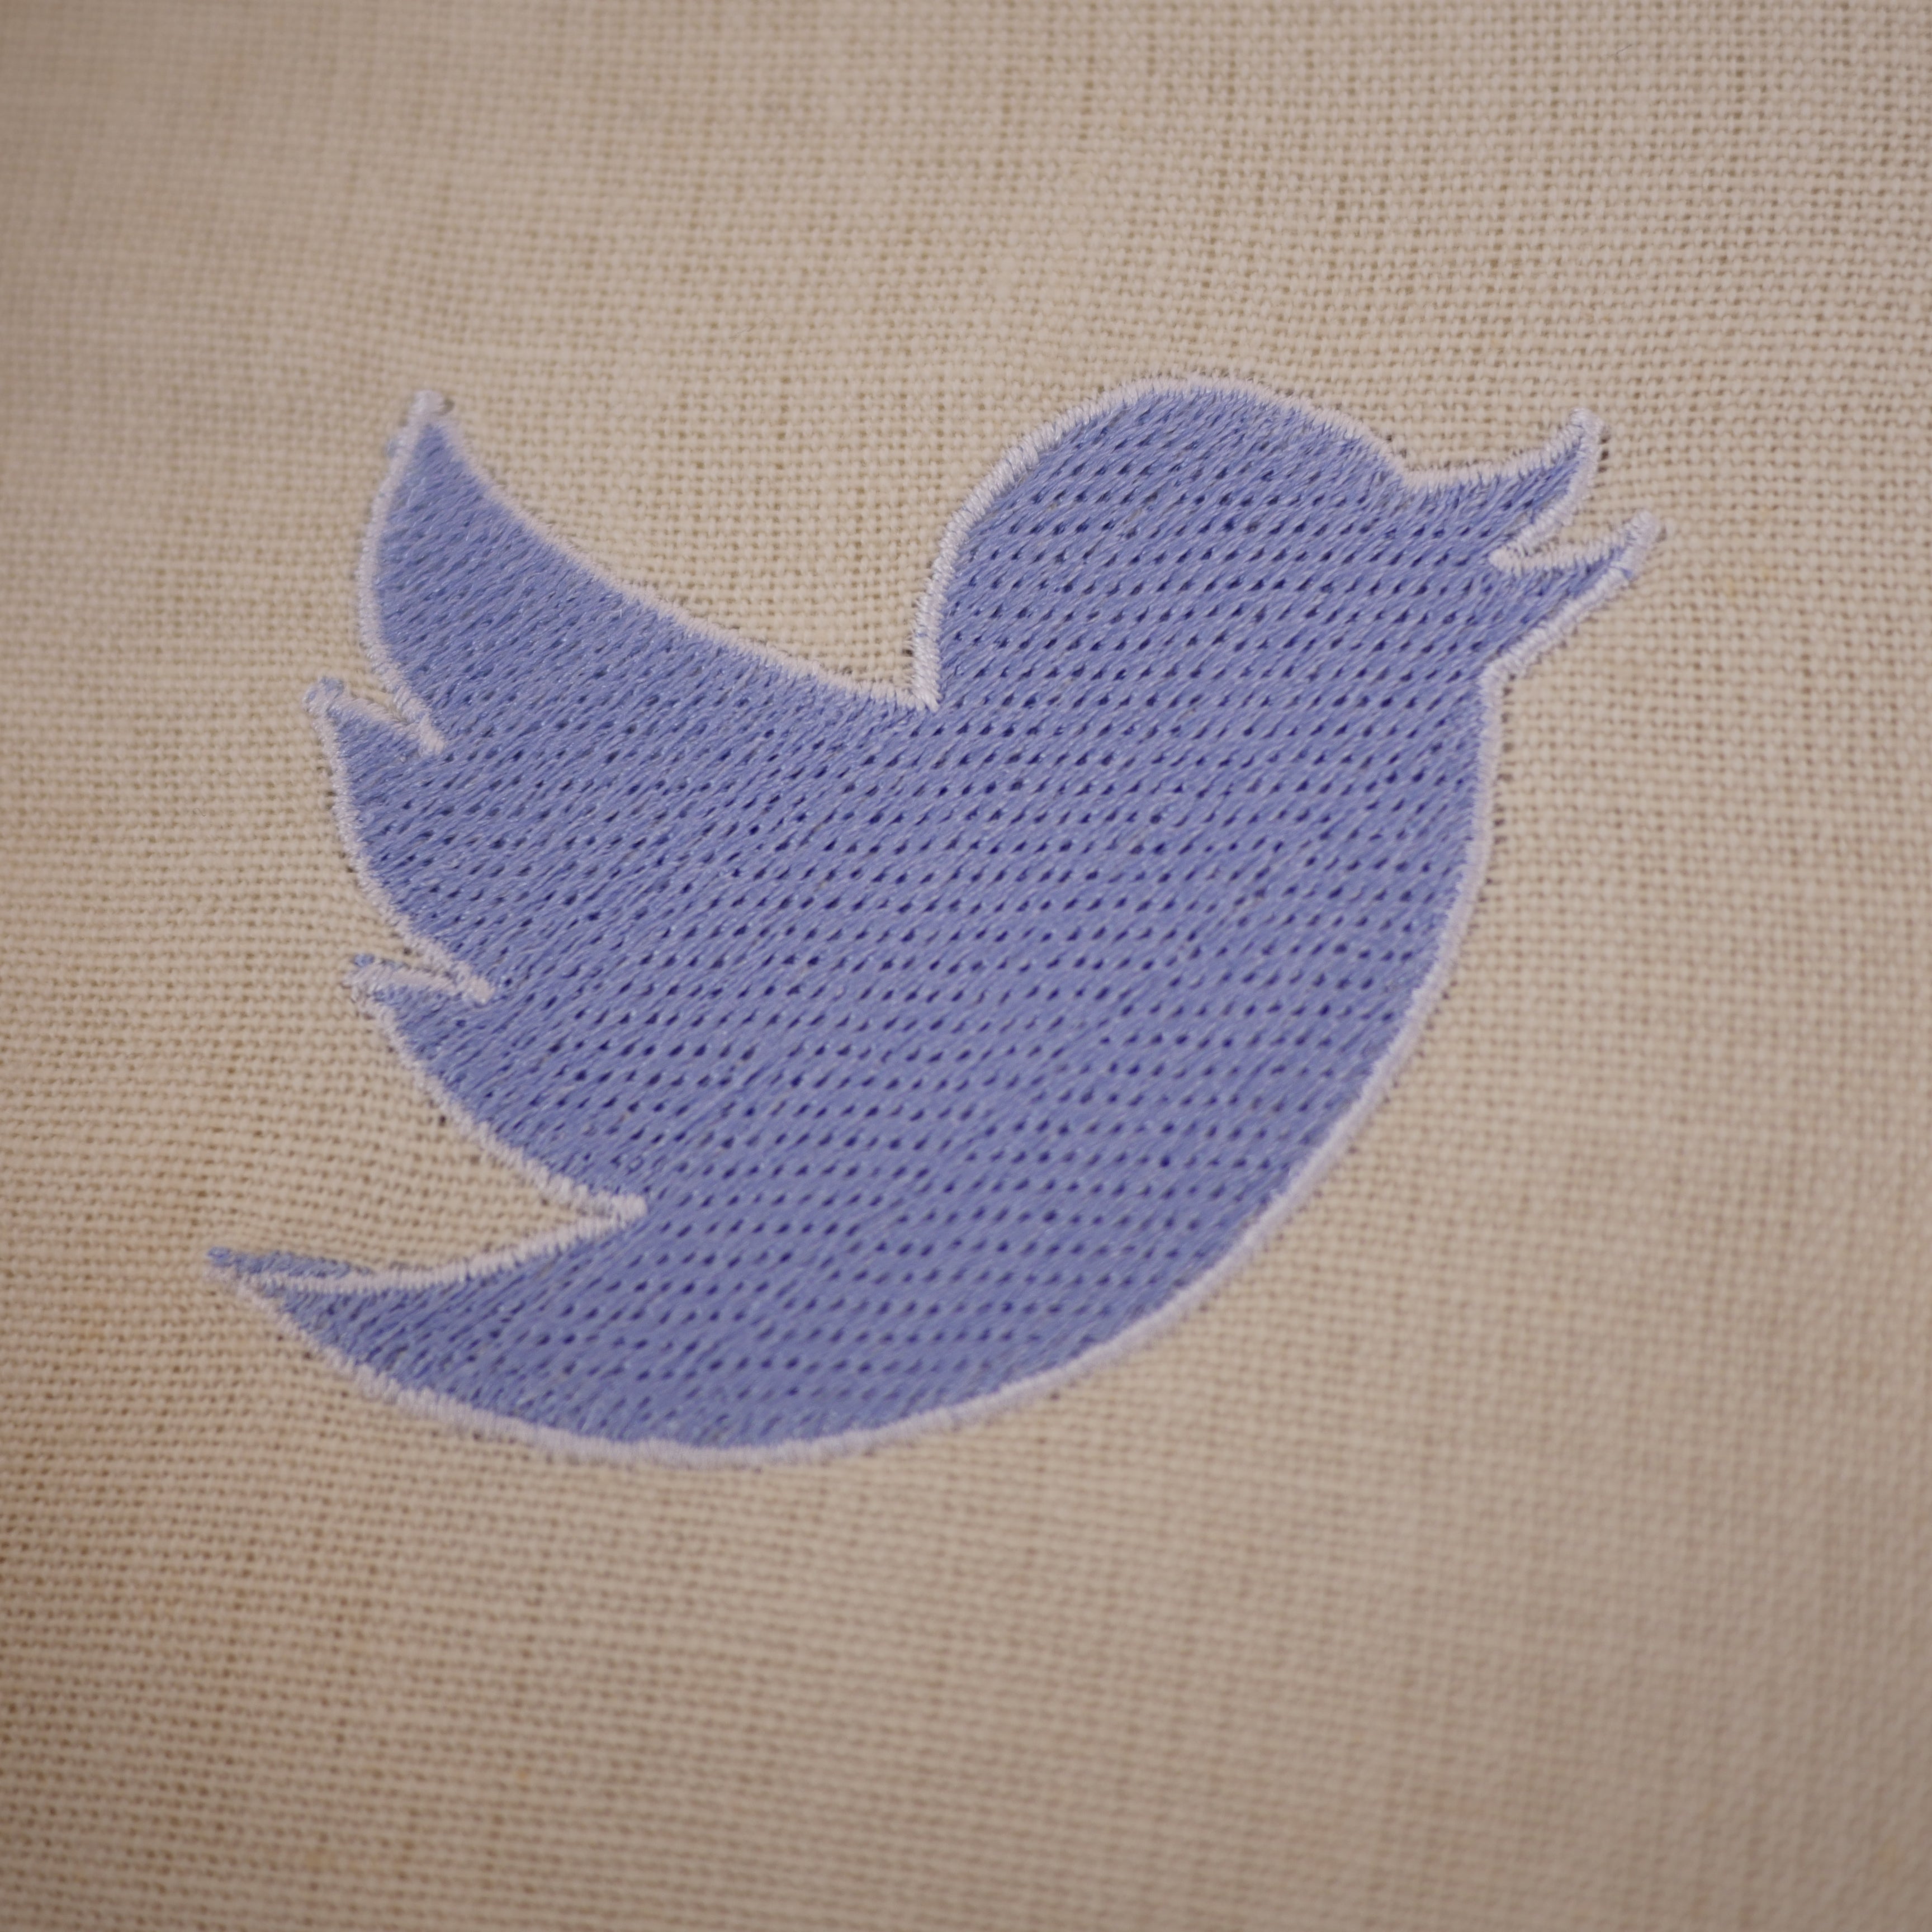 Twitter Embroidery Design